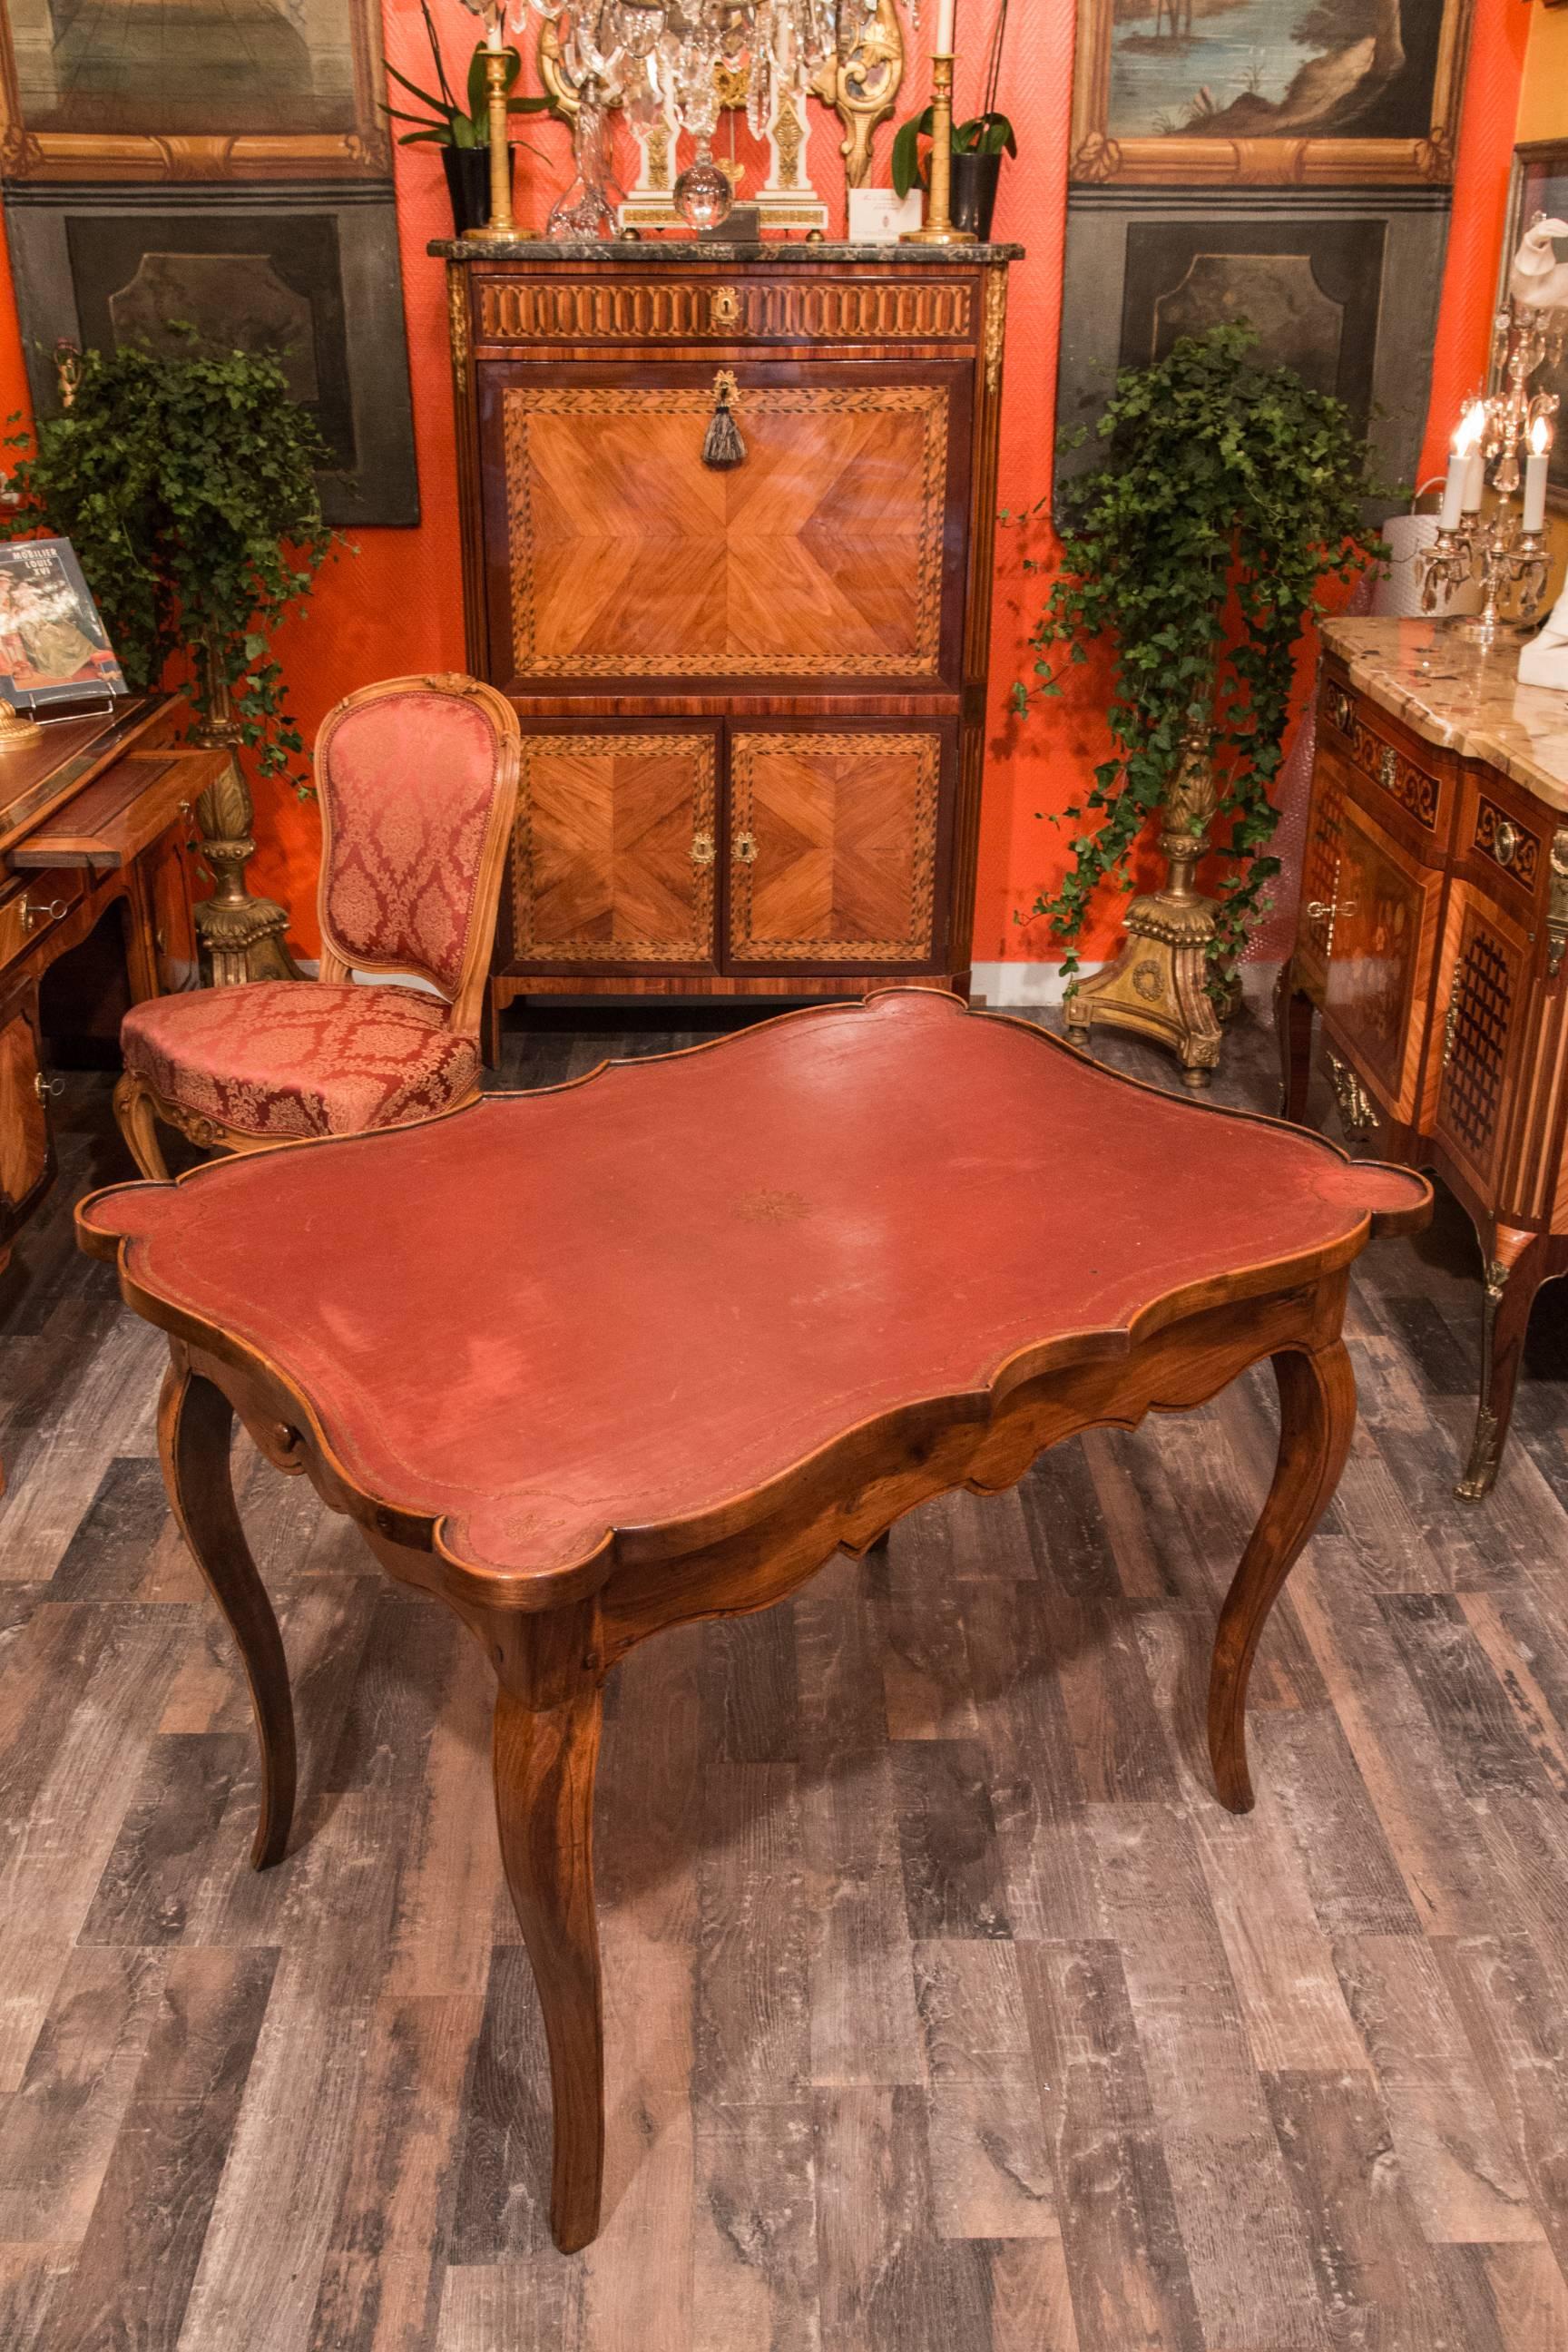 We are pleased to present you, a lovely and exciting chestnut game table circa 1740, having a drawer on each side and an embossed leather playing surface. Our game table rests on serpentine legs.

French Louis XV period, mid-18th century, circa